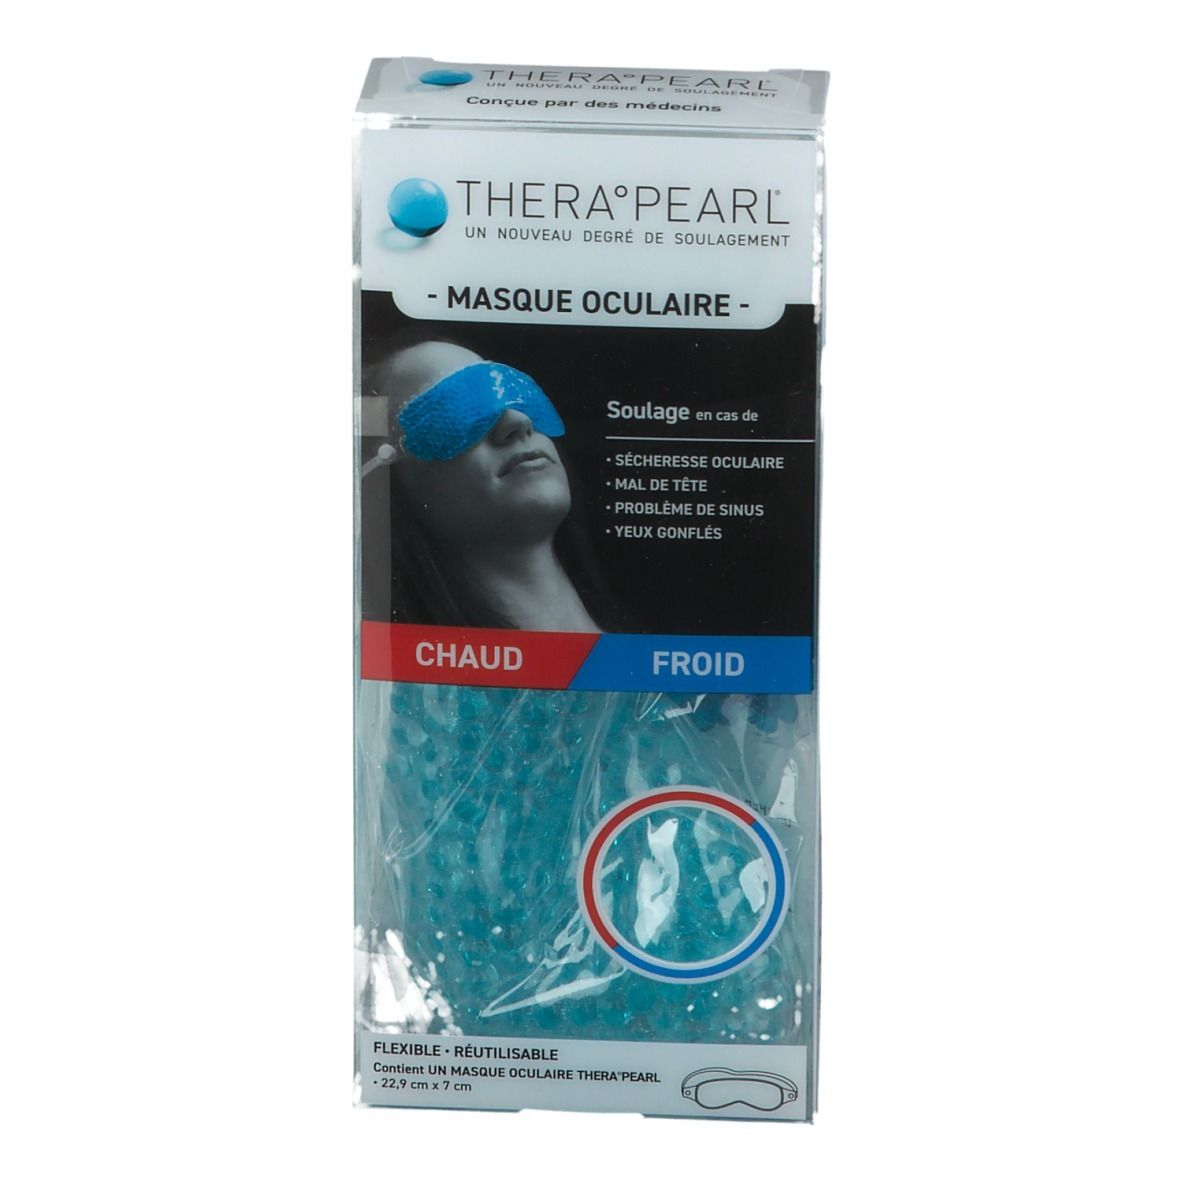 TheraPearl compresse chaud froid masque oculaire